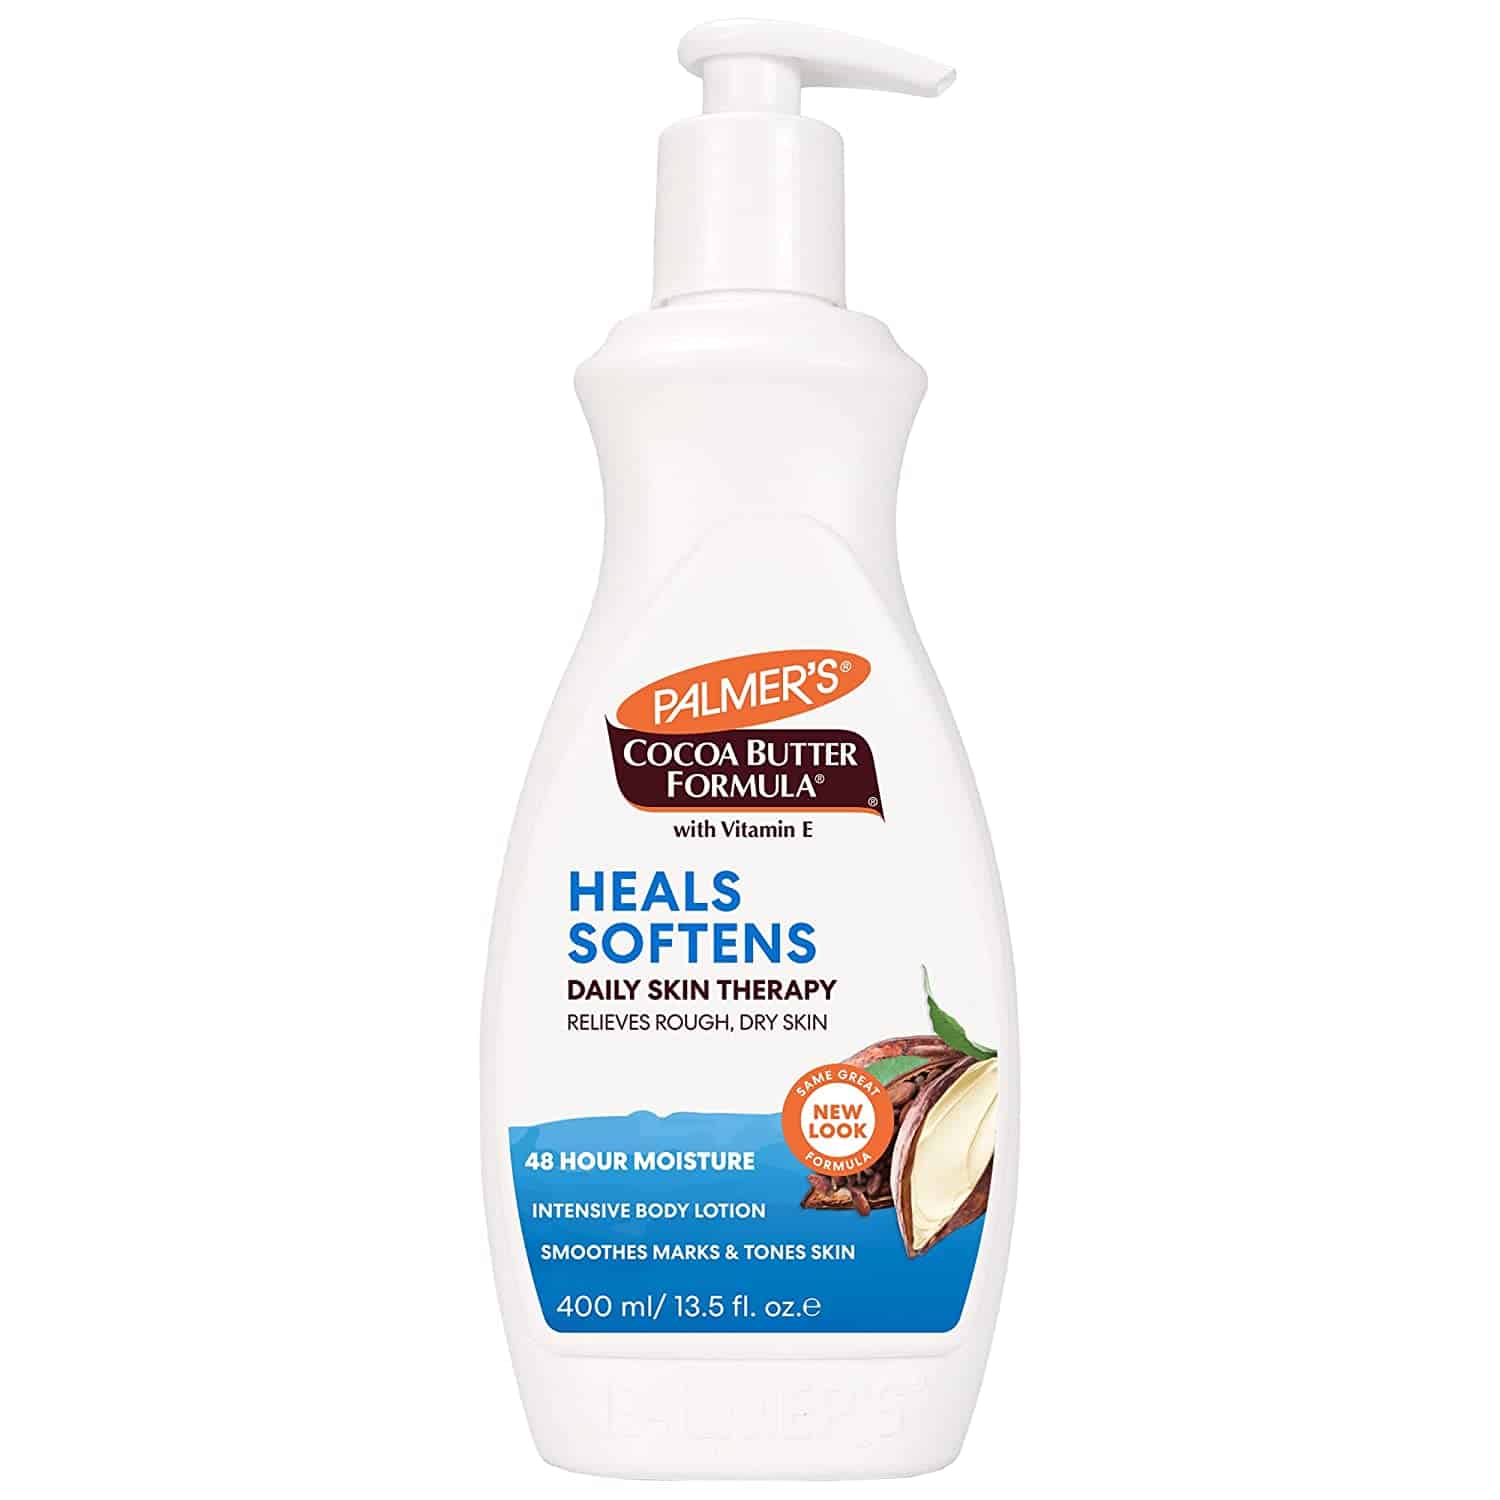 Palmer's Cocoa Butter Formula Daily Skin Therapy Cocoa Butter Body Lotion